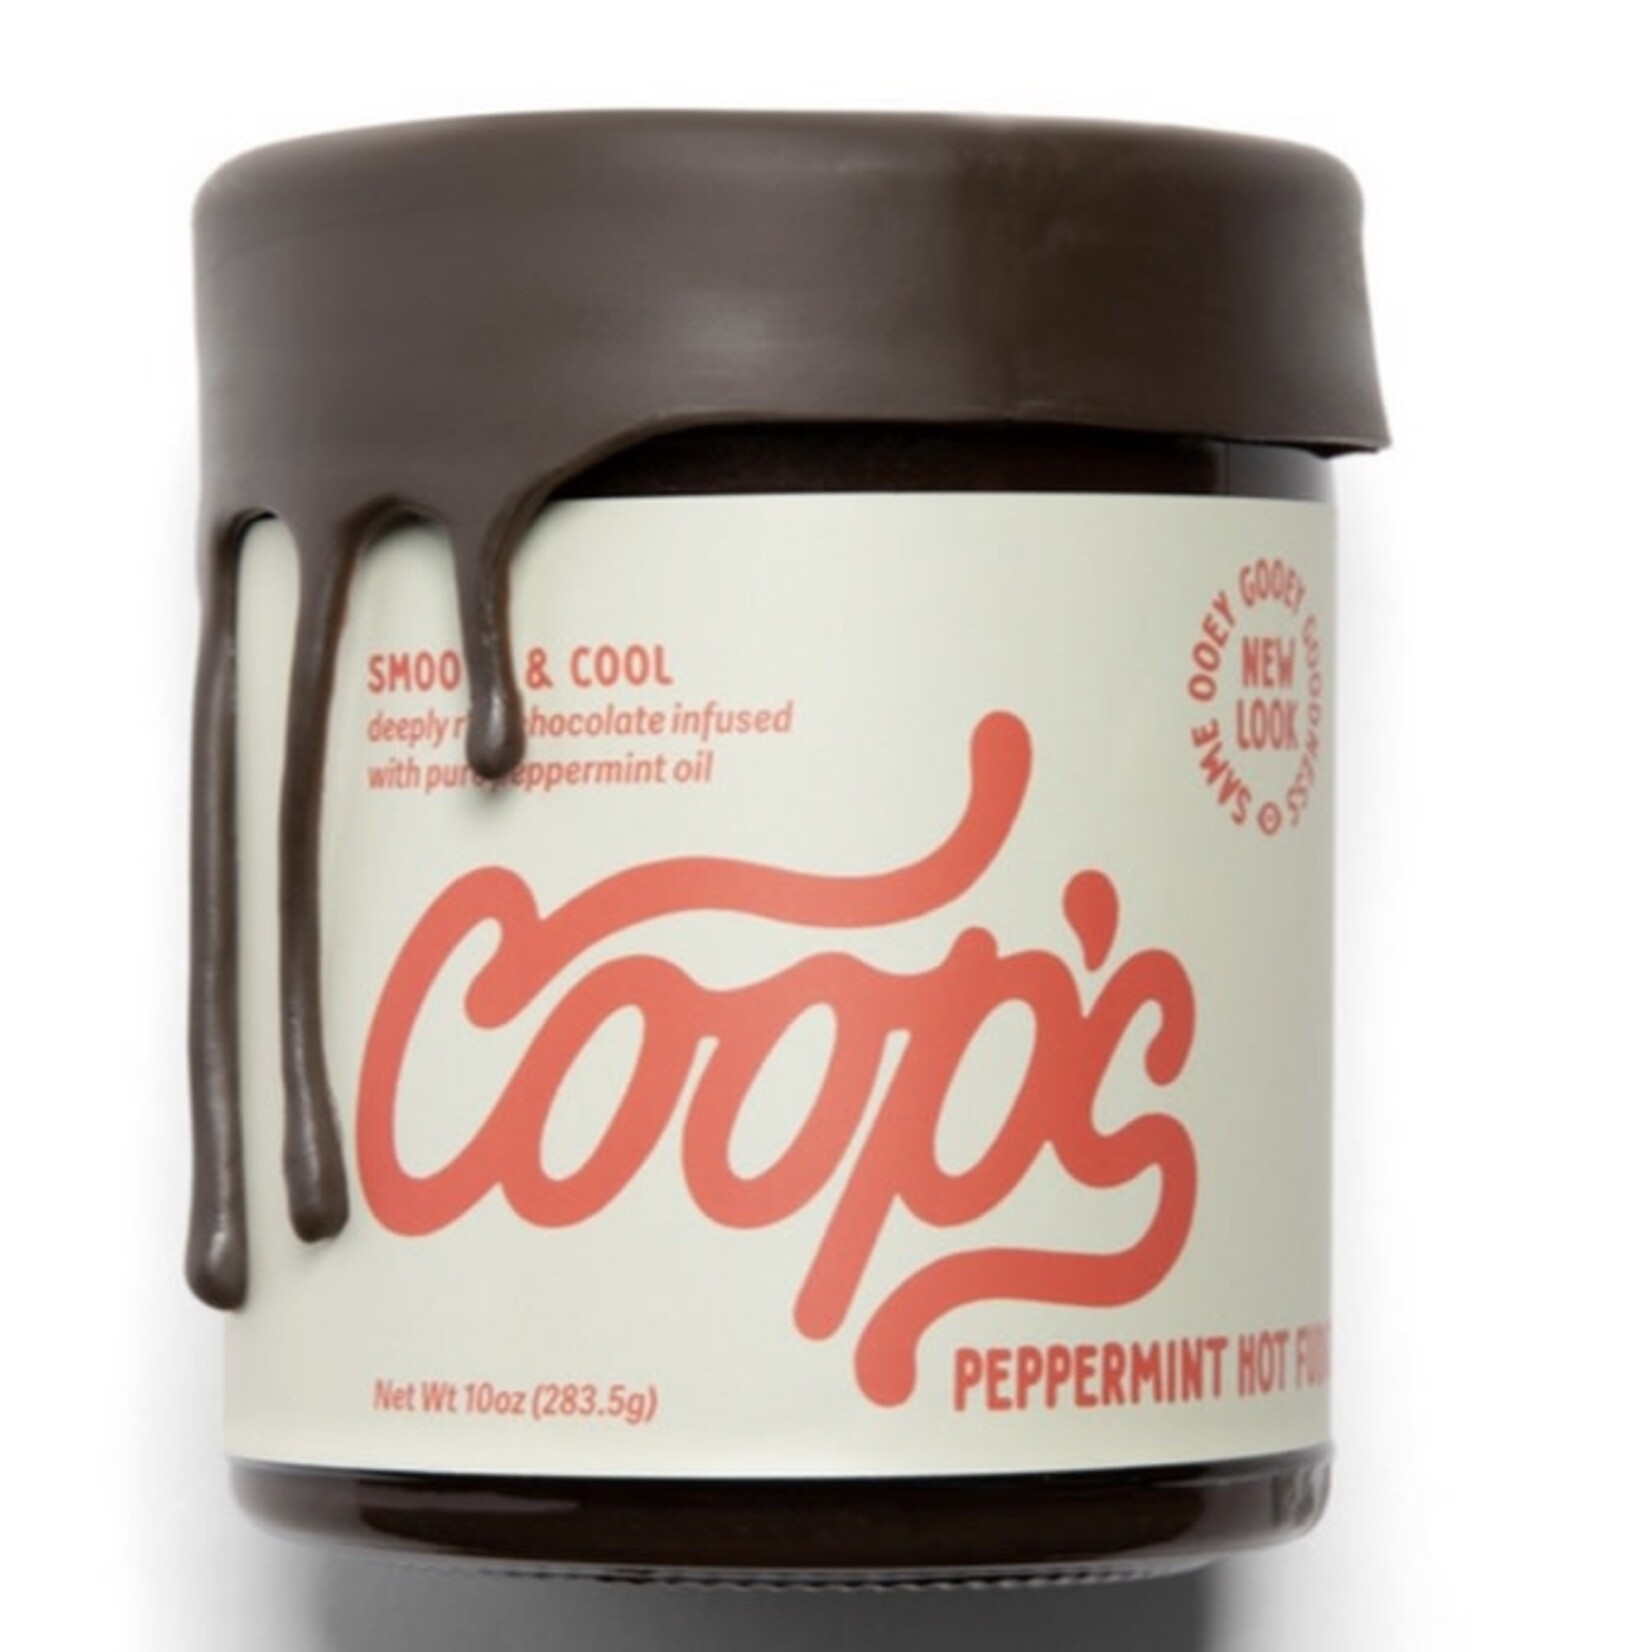 COOPS COOPS Peppermint Hot Fudge Sauce